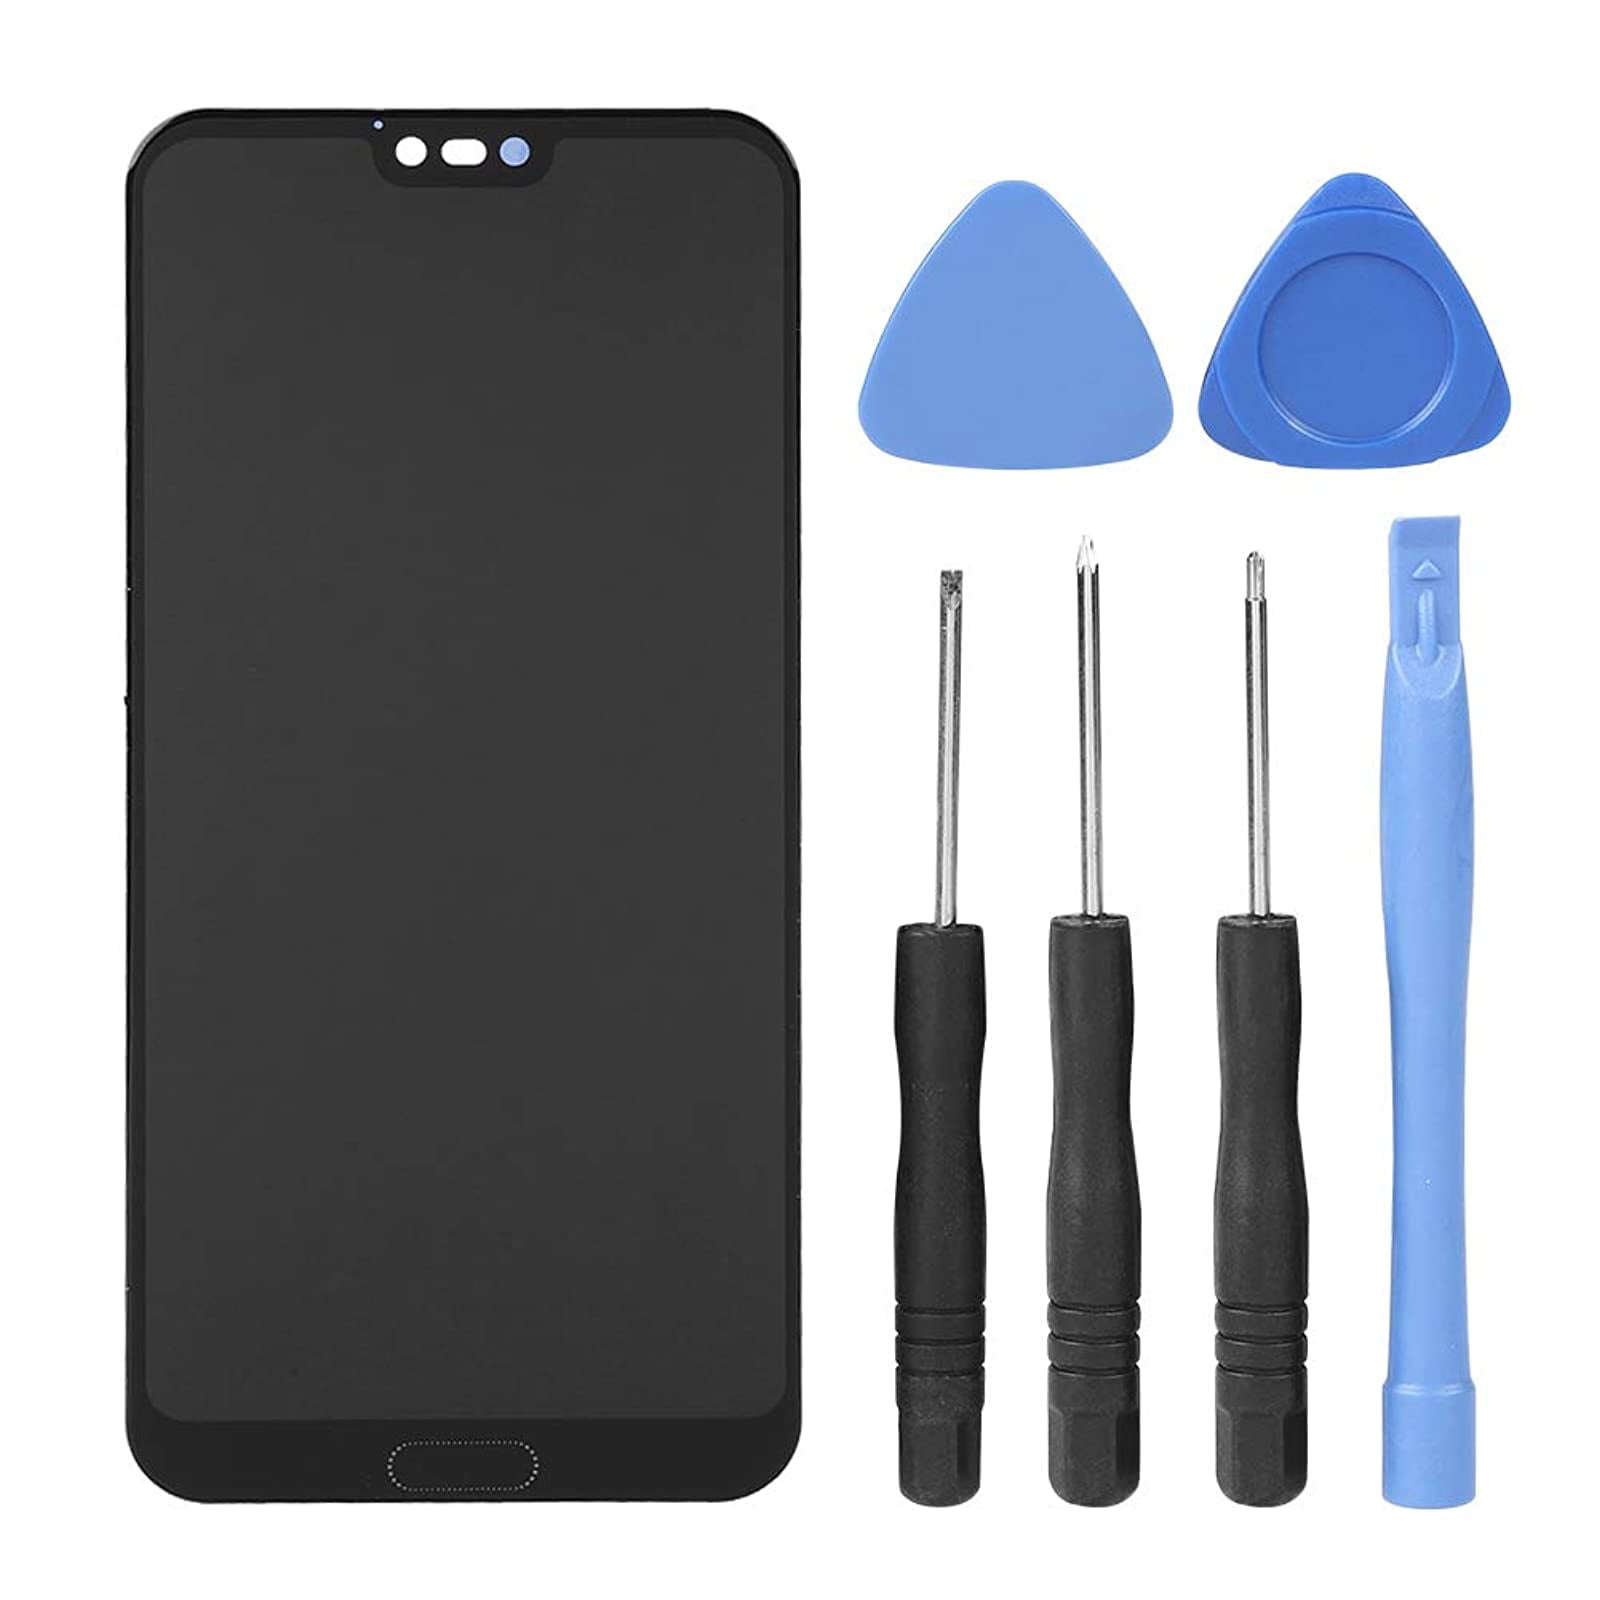 LCD Display Touch Screen Replacement Tools Protective Cover For Blackberry Priv